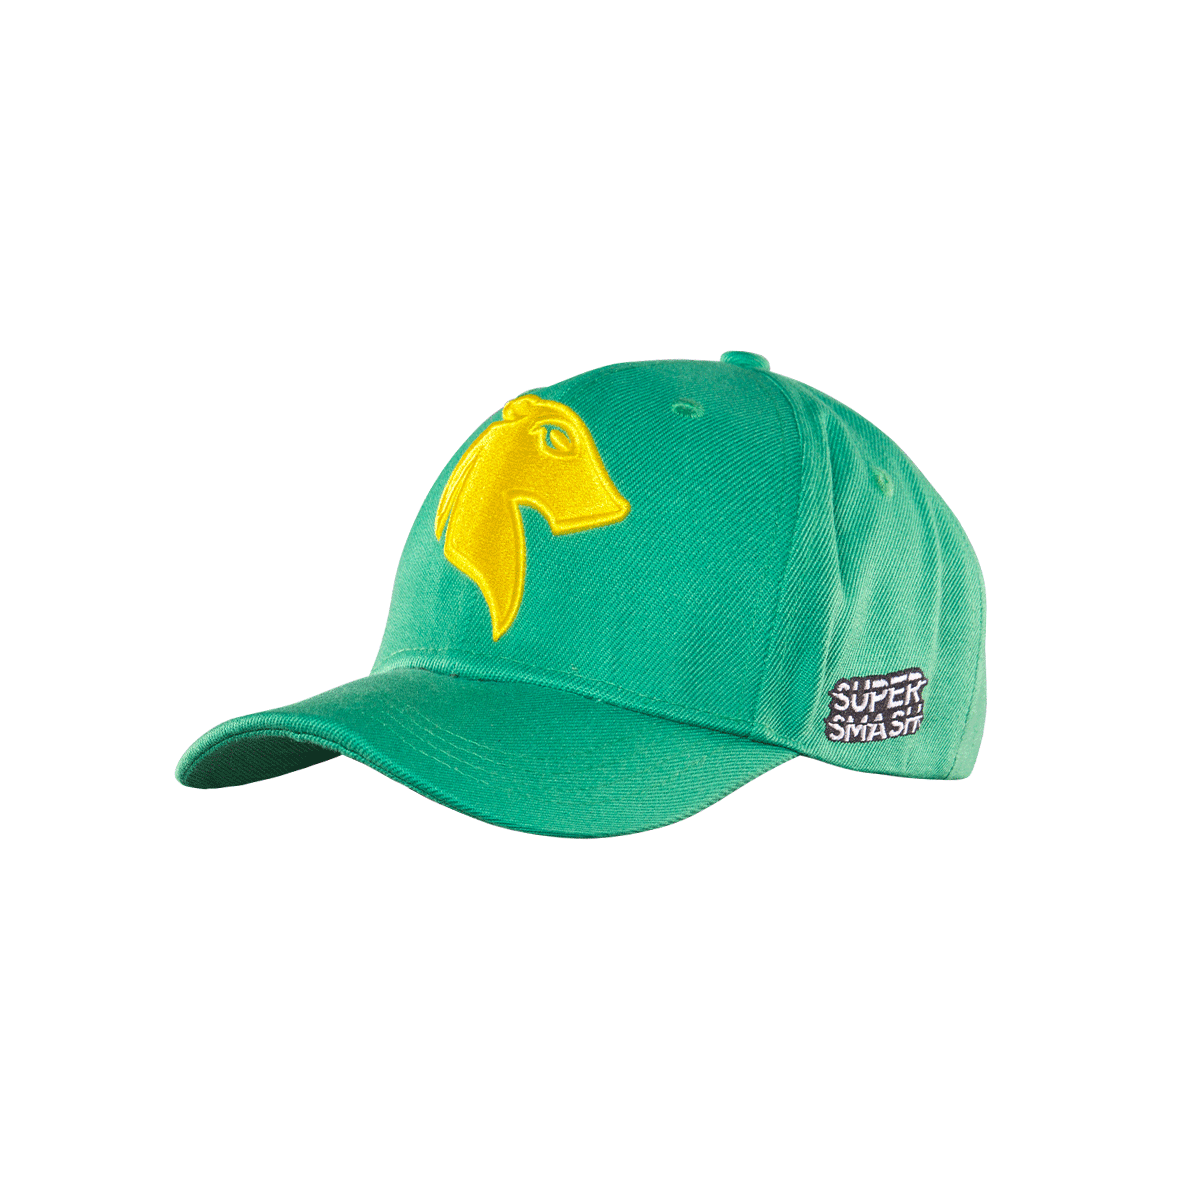 Central Hinds T20 Cap